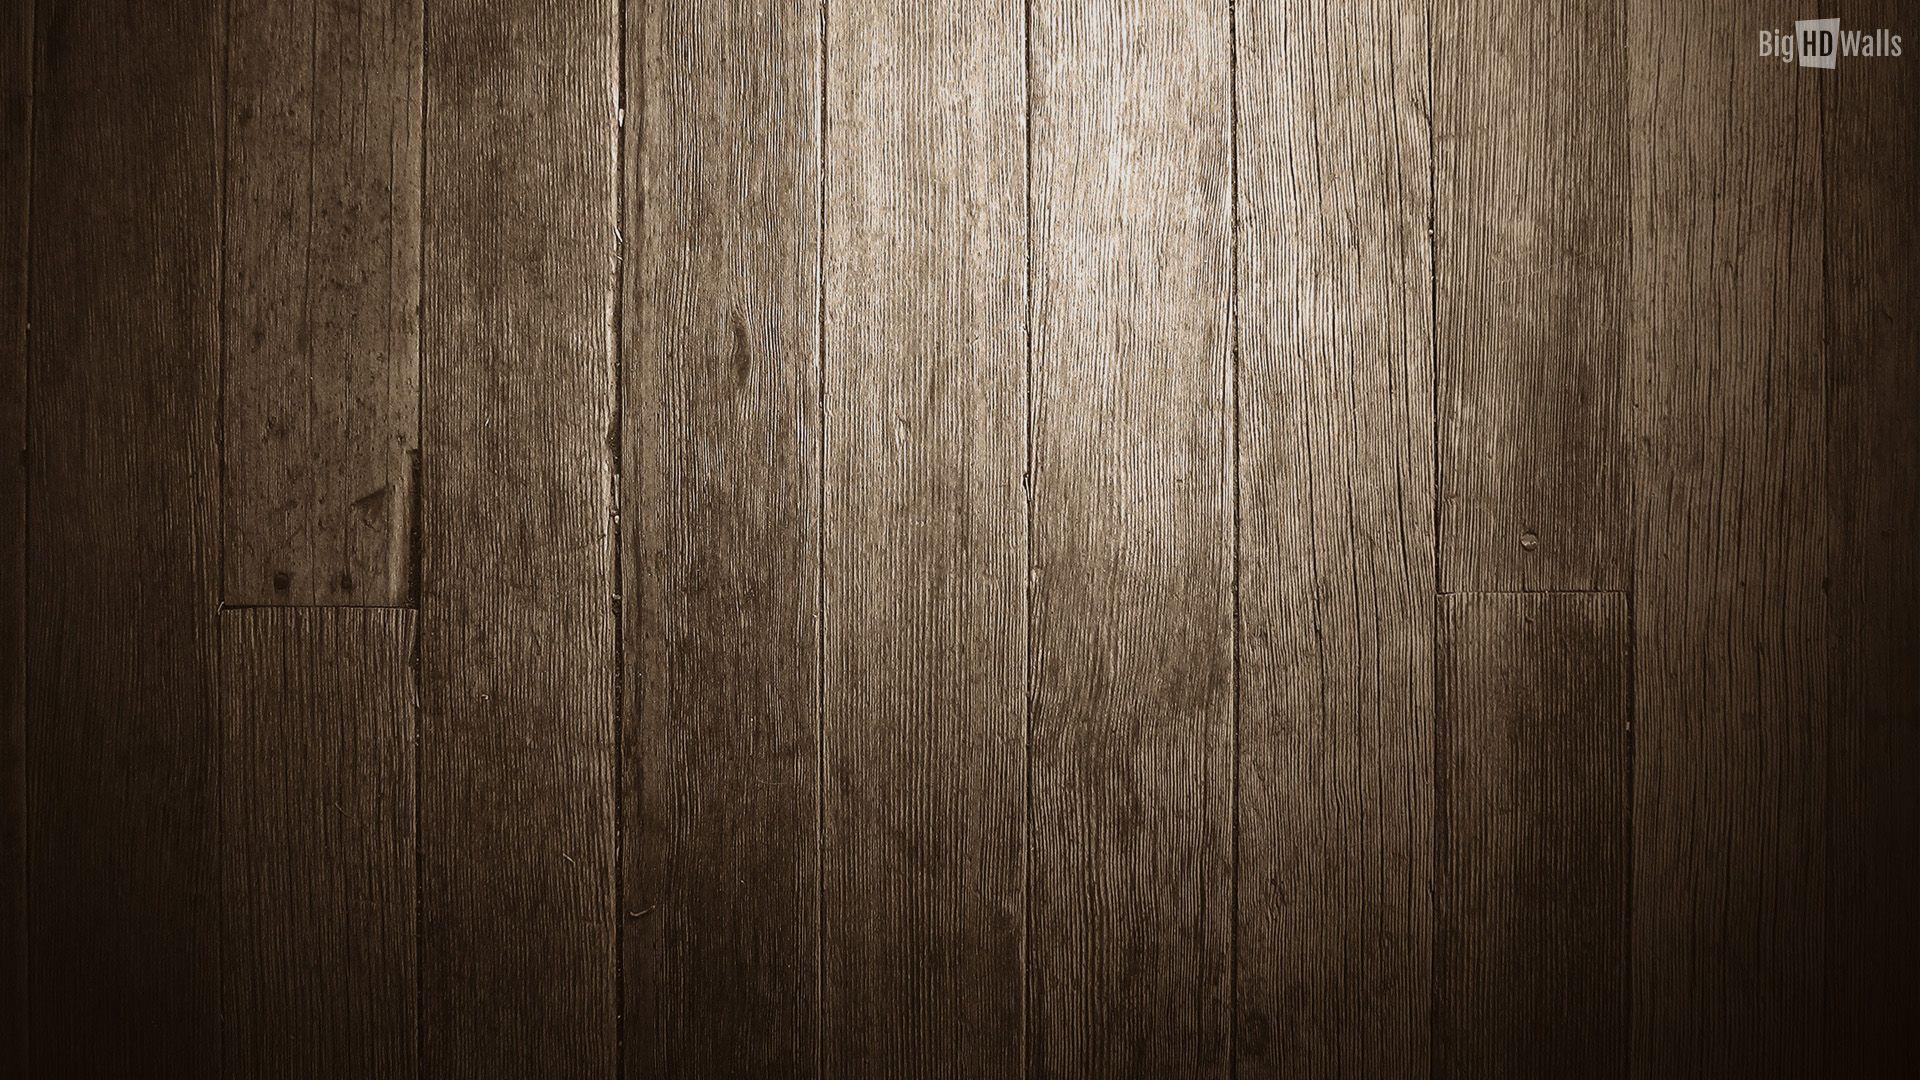 Brown And Wood. 50 Seamless High Quality Wood Textures Pattern